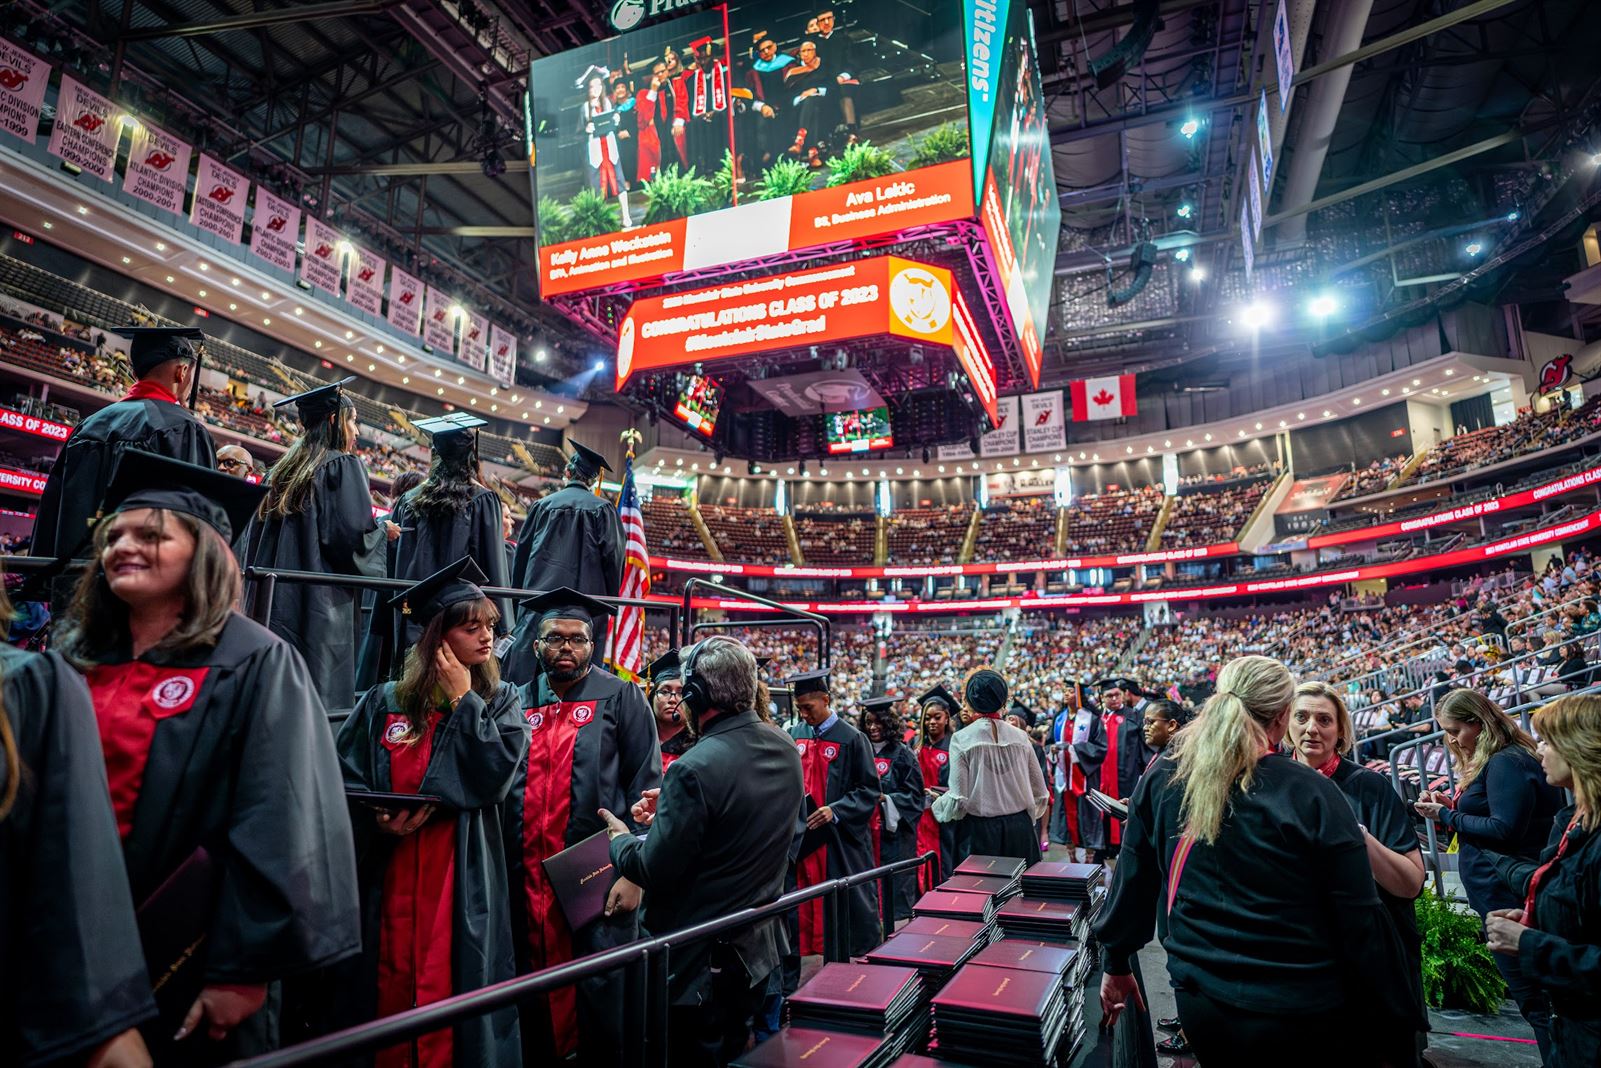 Students exit the Prudential Center after receiving their diplomas. Karsten Englander | The Montclarion